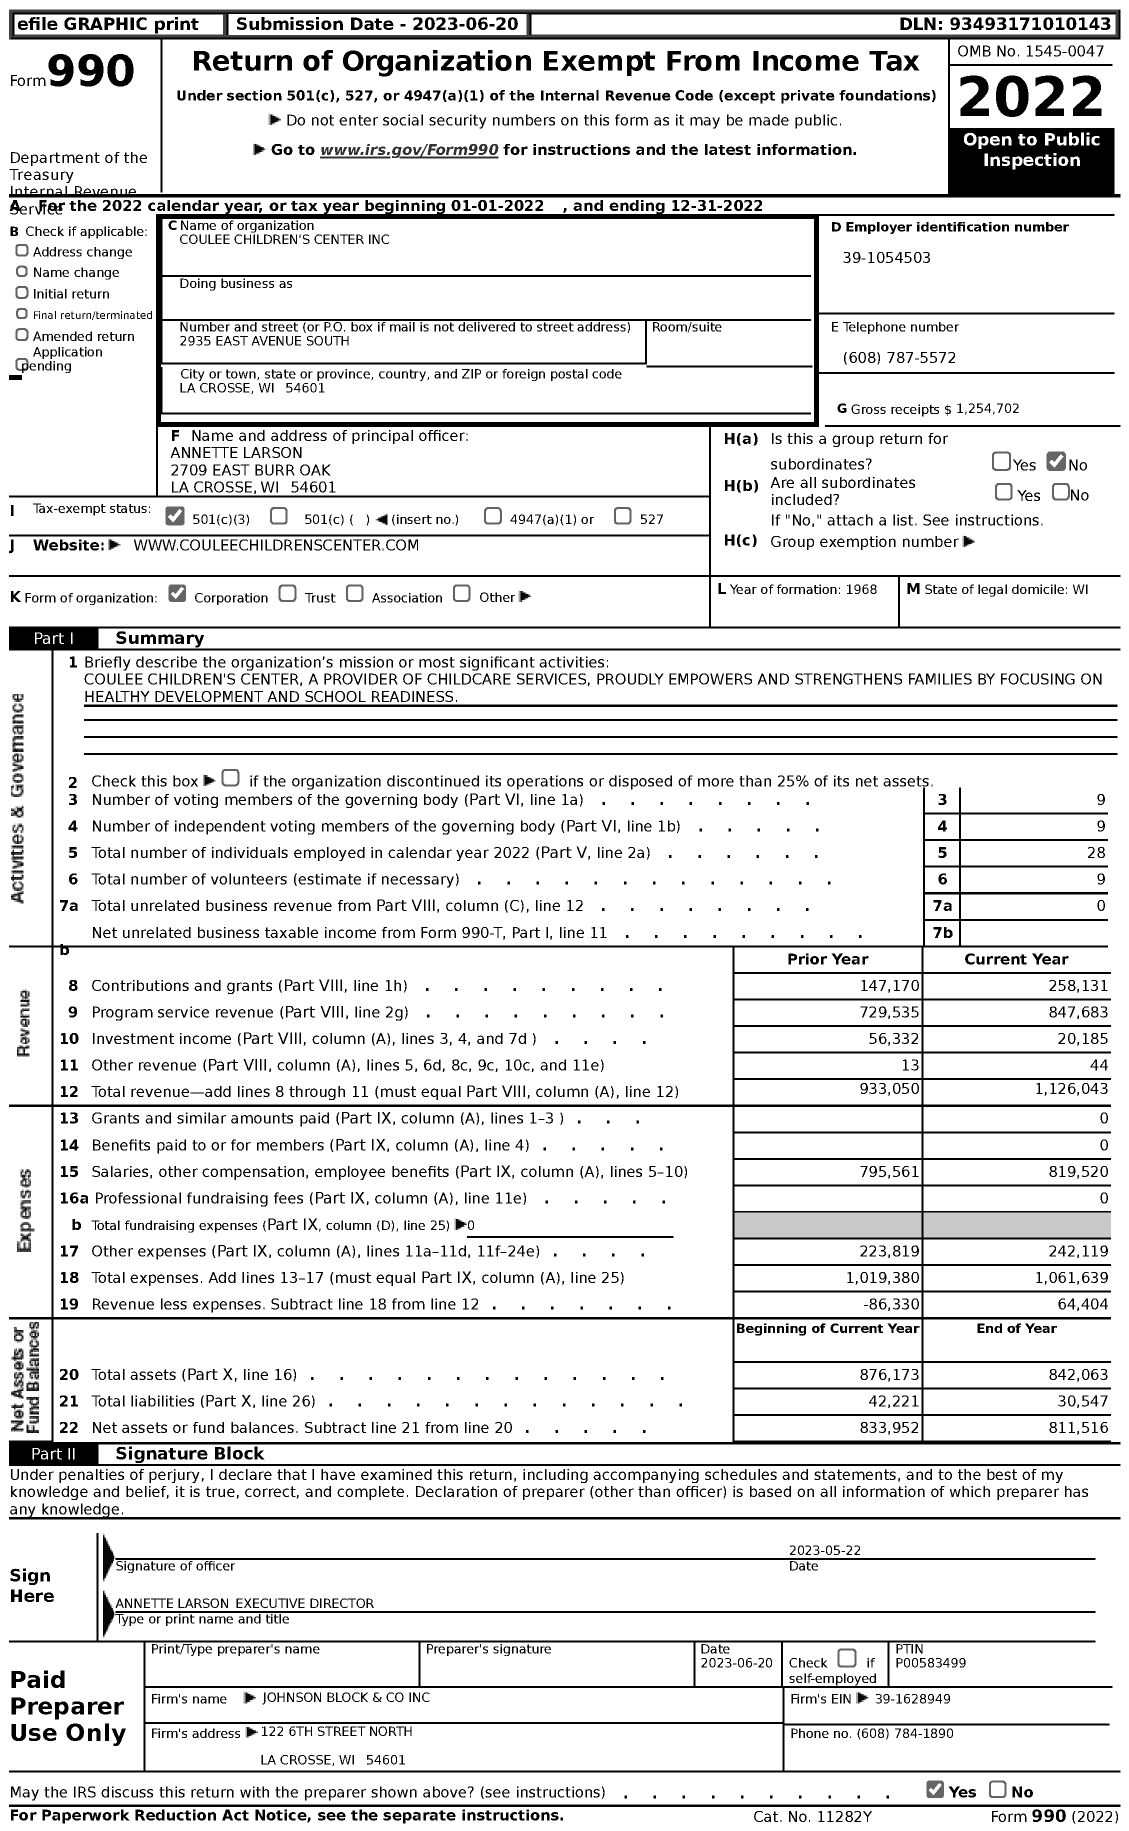 Image of first page of 2022 Form 990 for Coulee Children's Center